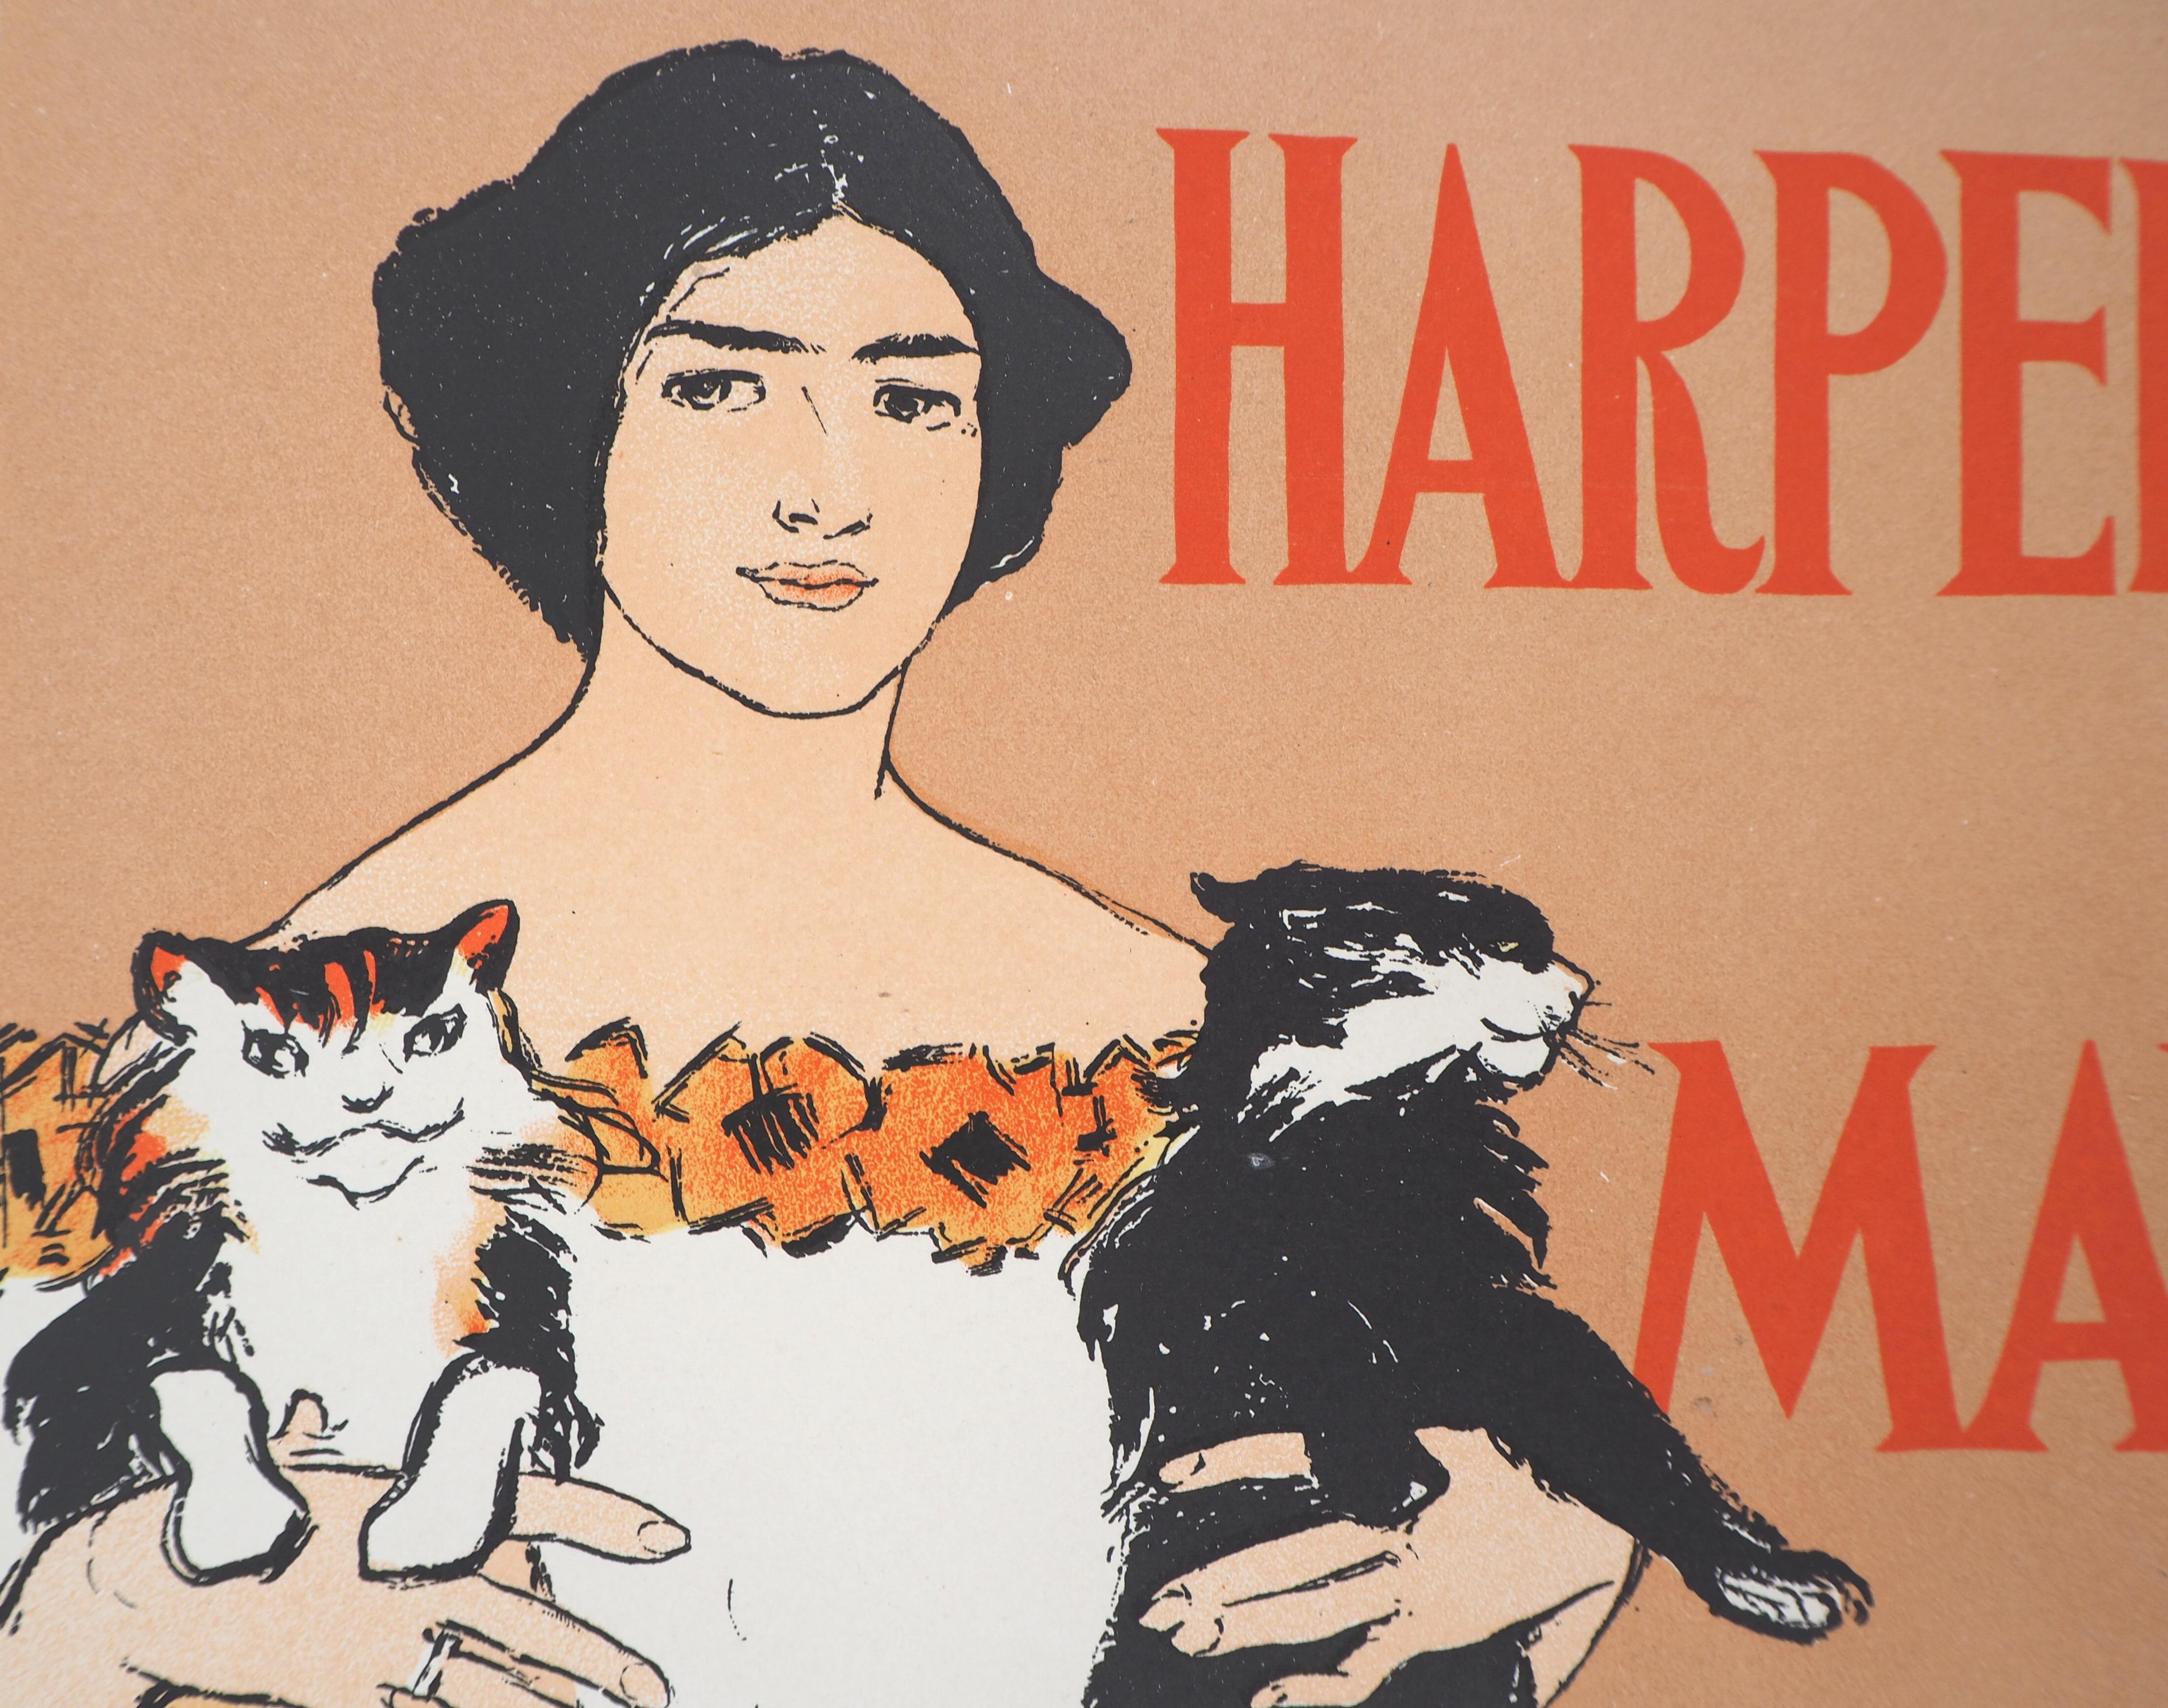 Edward PENFIELD (1866-1925)
Young Lady and Two Cats (Harper's), 1897

Original lithograph
Printed signature in the plate
On vellum 
Size 39 x 29 cm (c. 15.3 x 11.4